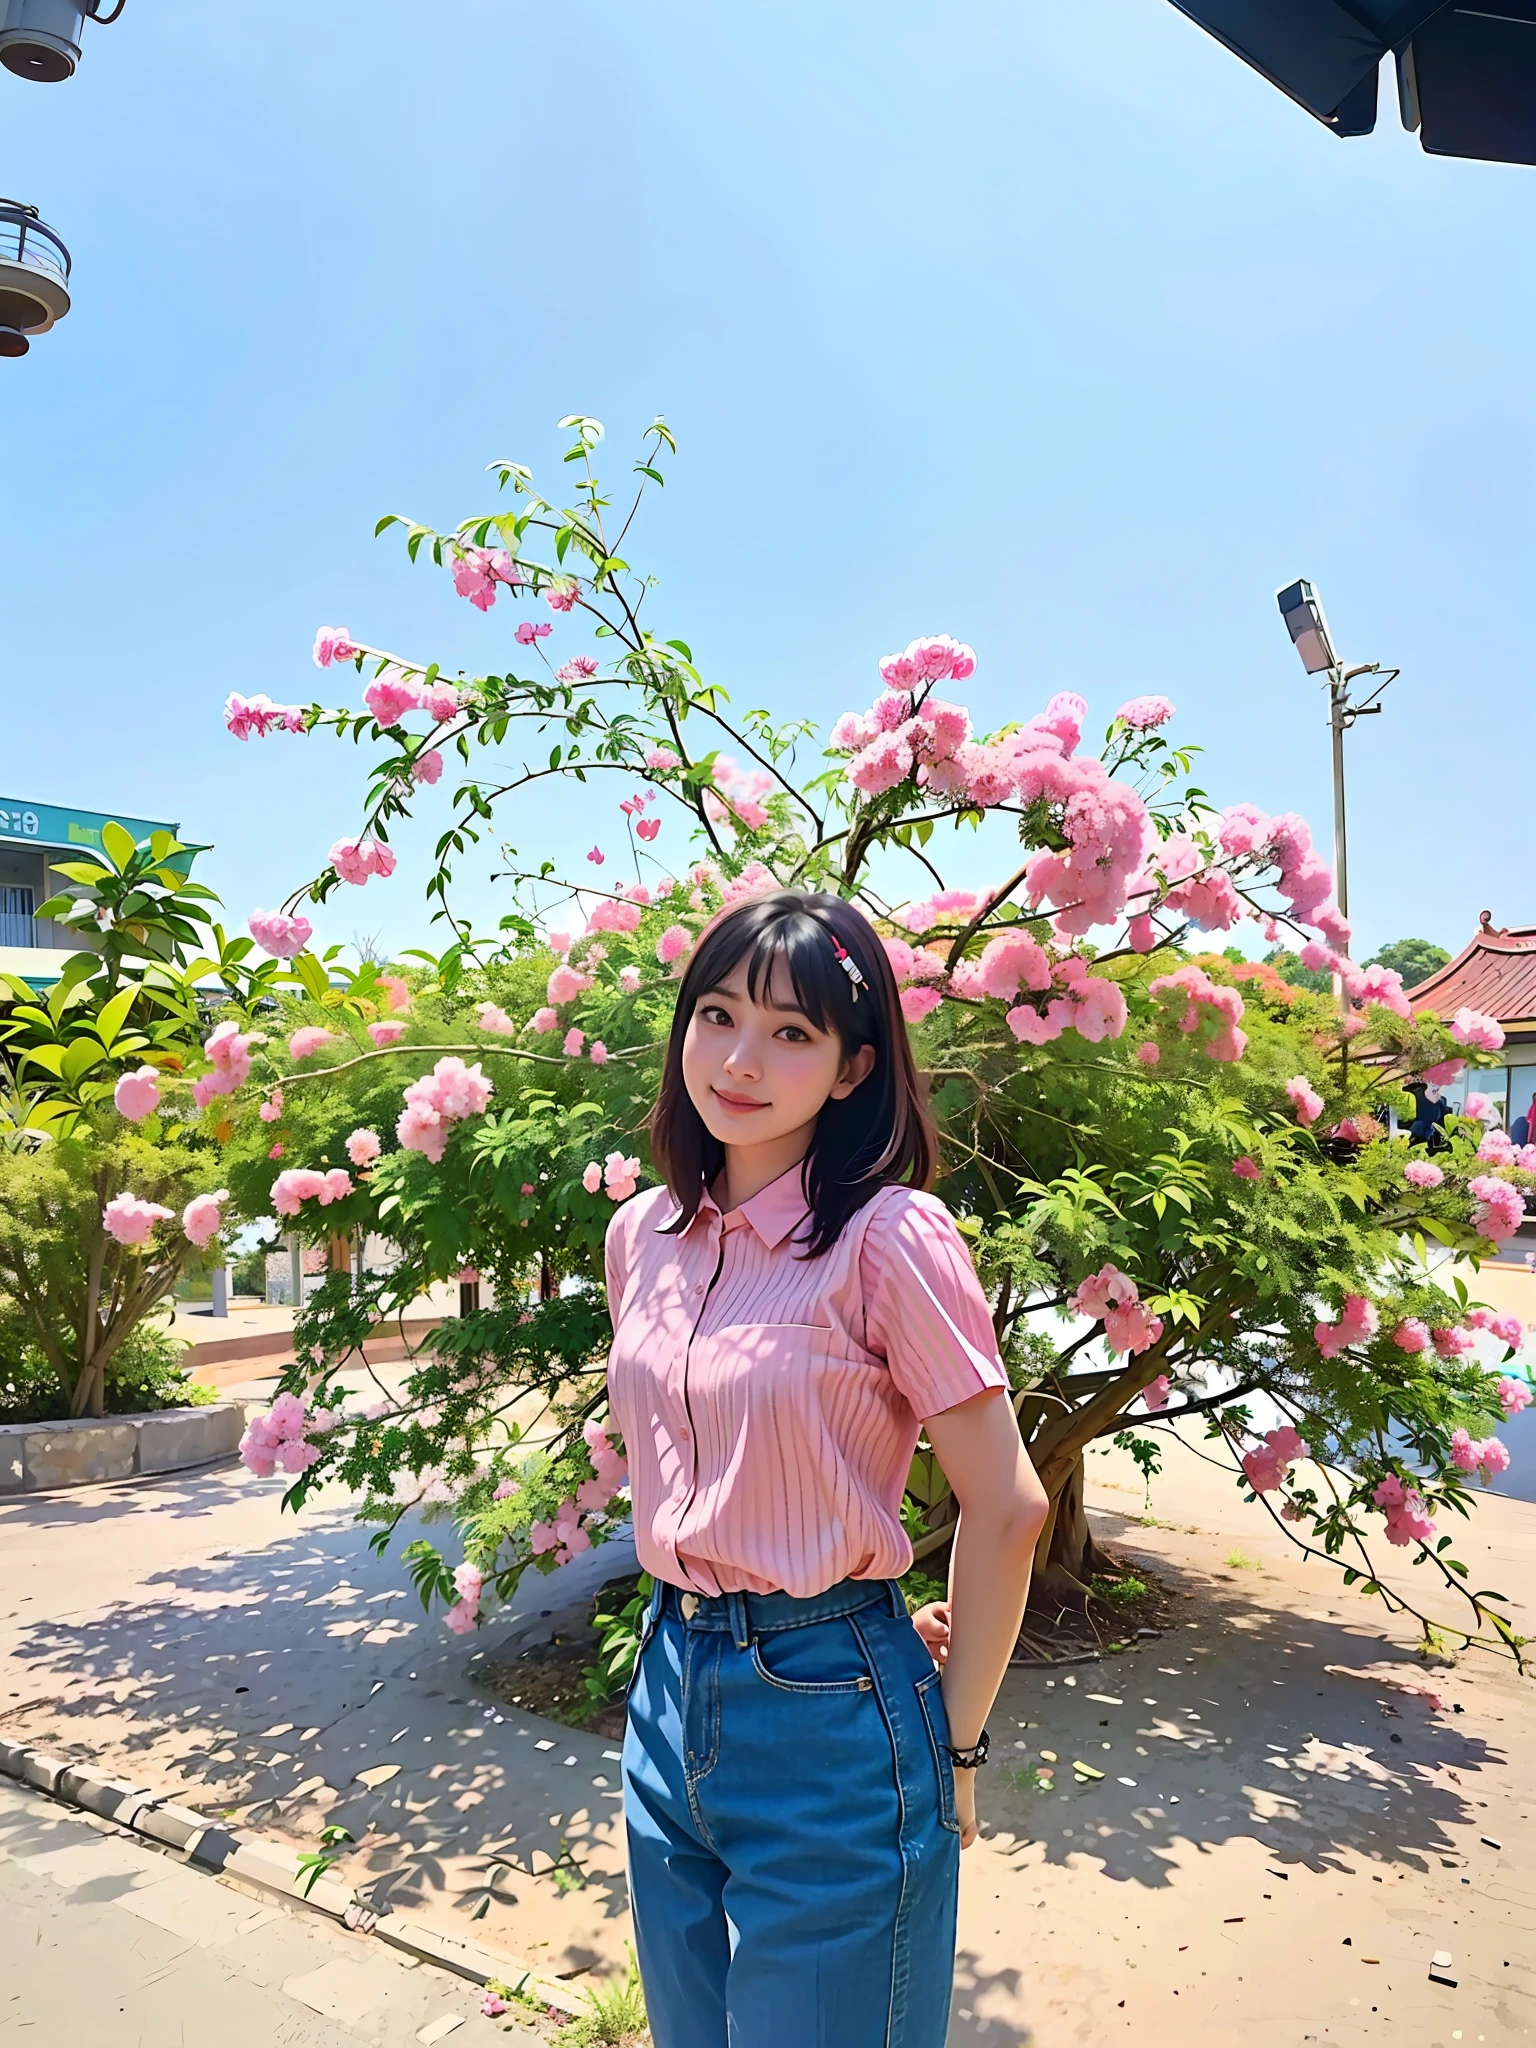 arafed woman standing in front of a bush with pink flowers, nivanh chanthara, with flowers, photo taken with canon 5d, thawan duchanee, dang my linh, a young asian woman, anime thai girl, photo taken in 2 0 2 0, hoang long ly, in sunny weather, with a park in the background